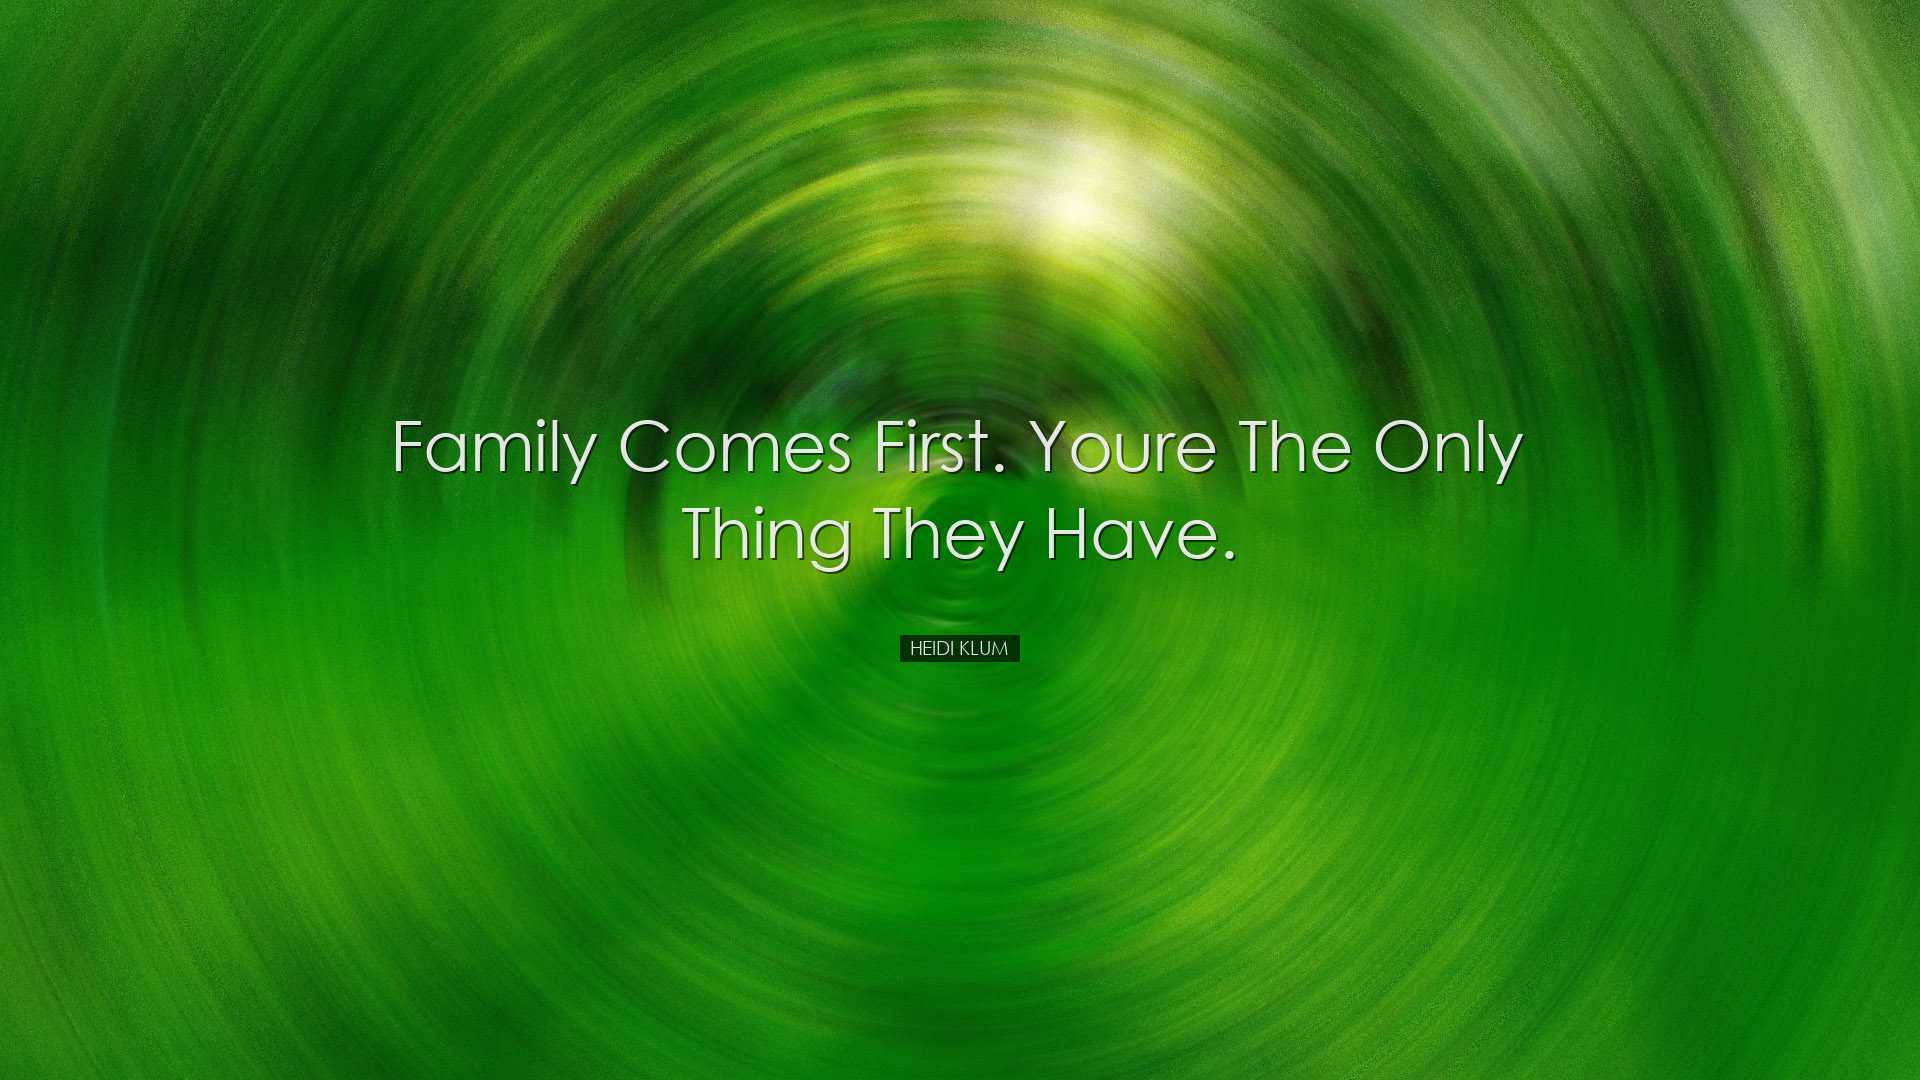 Family comes first. Youre the only thing they have. - Heidi Klum